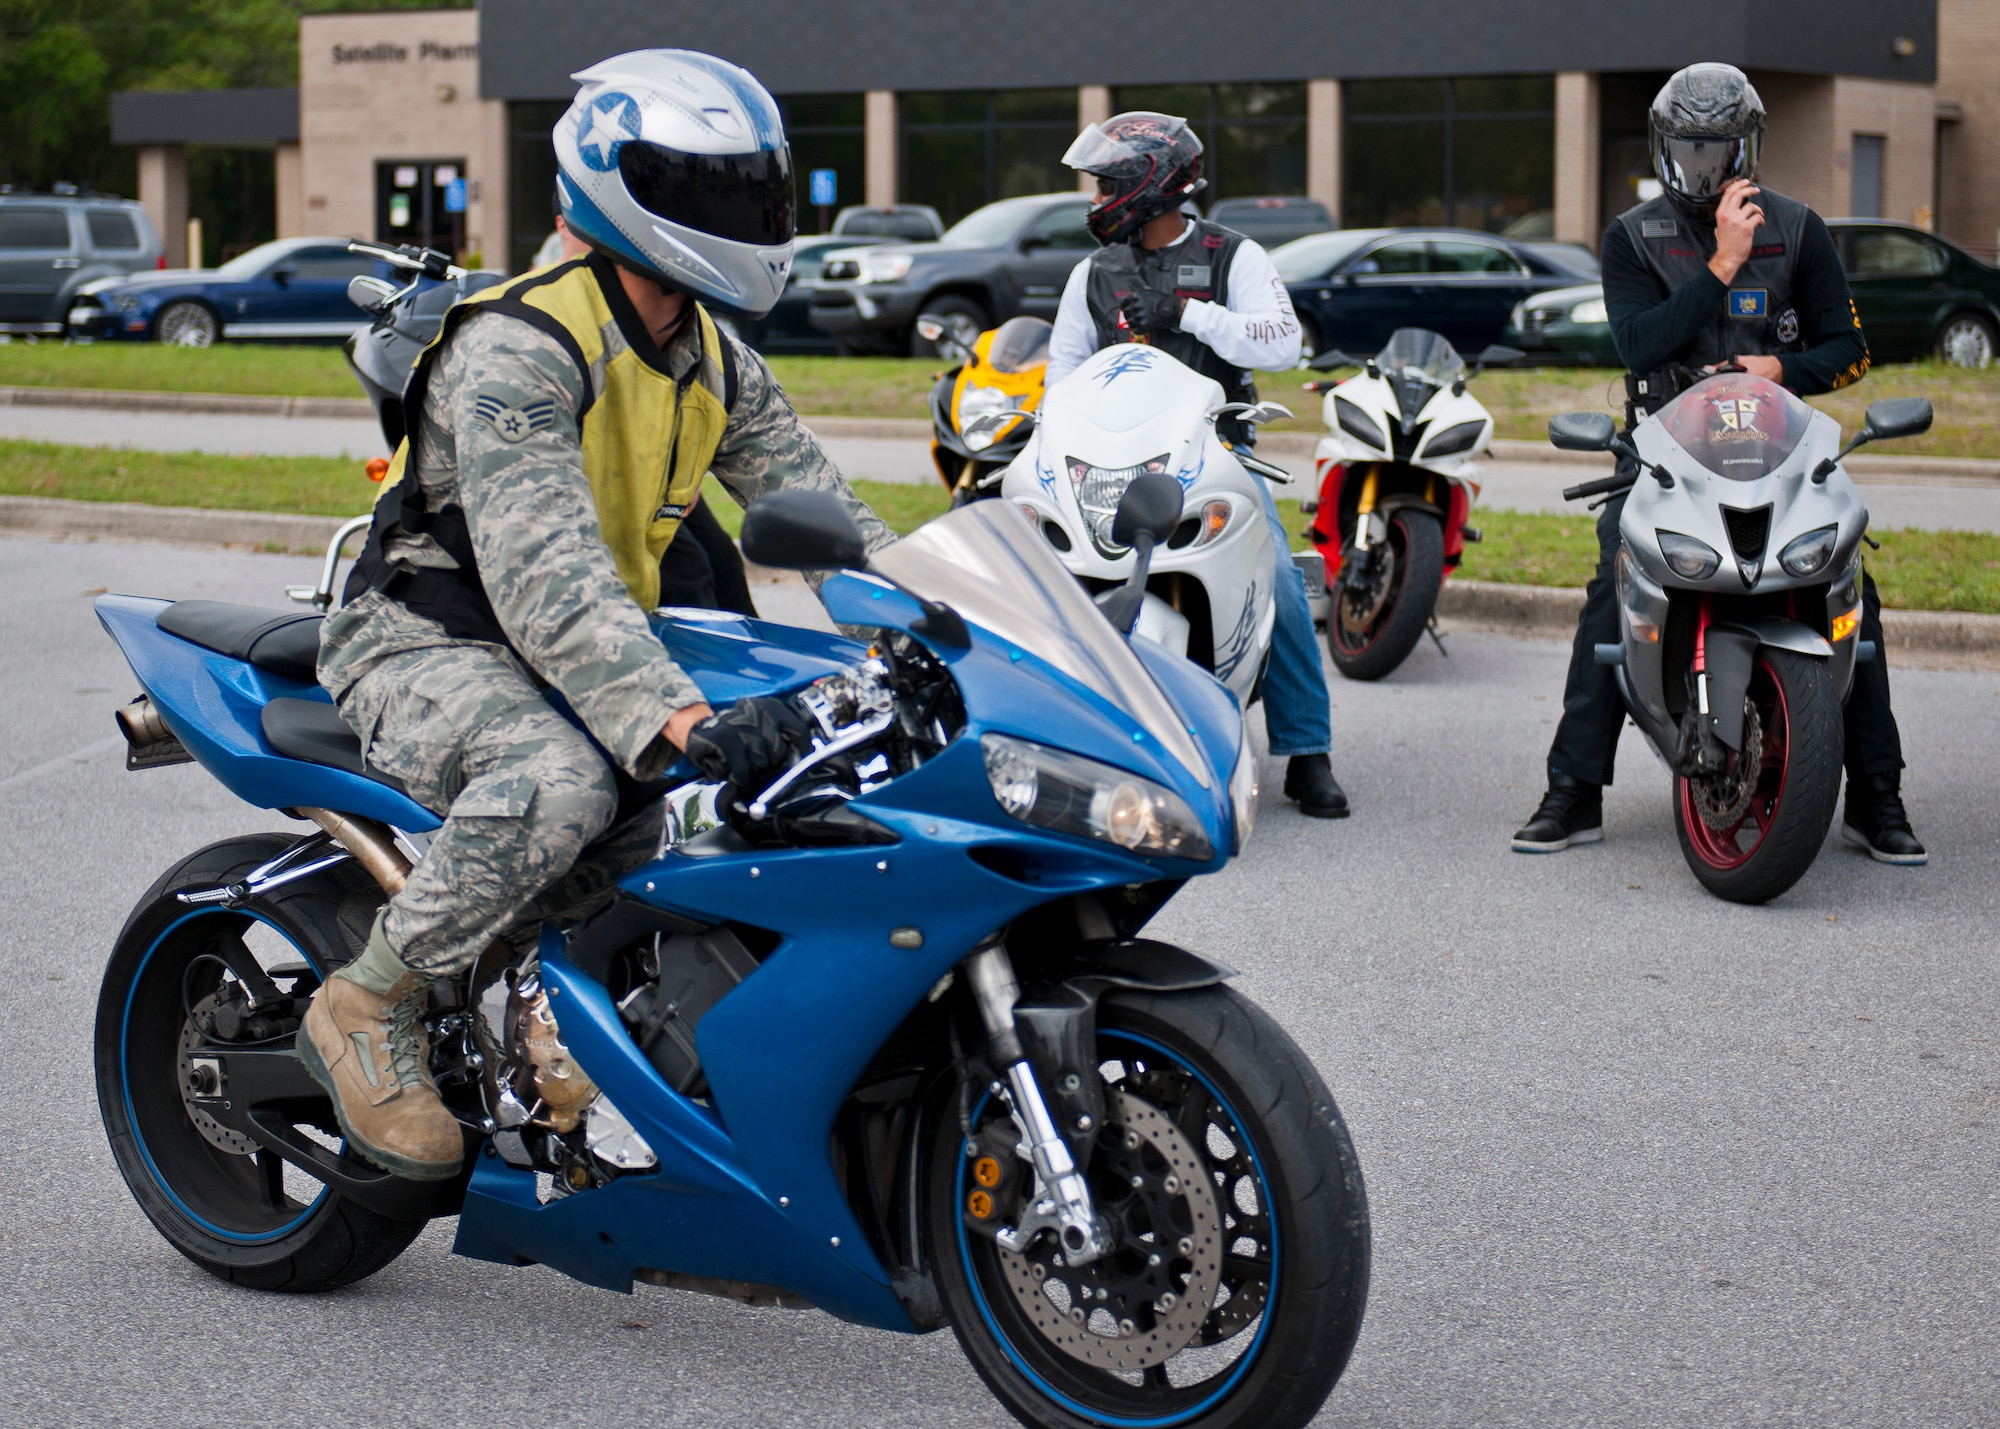 An Airman cruises by a group of riders after the base’s annual motorcycle safety rally April 17 at Eglin Air Force Base, Fla.  Approximately 600 civilian and military riders rode in for the joint 53rd Wing/96th Test Wing event.  (U.S. Air Force photo/Samuel King Jr.)